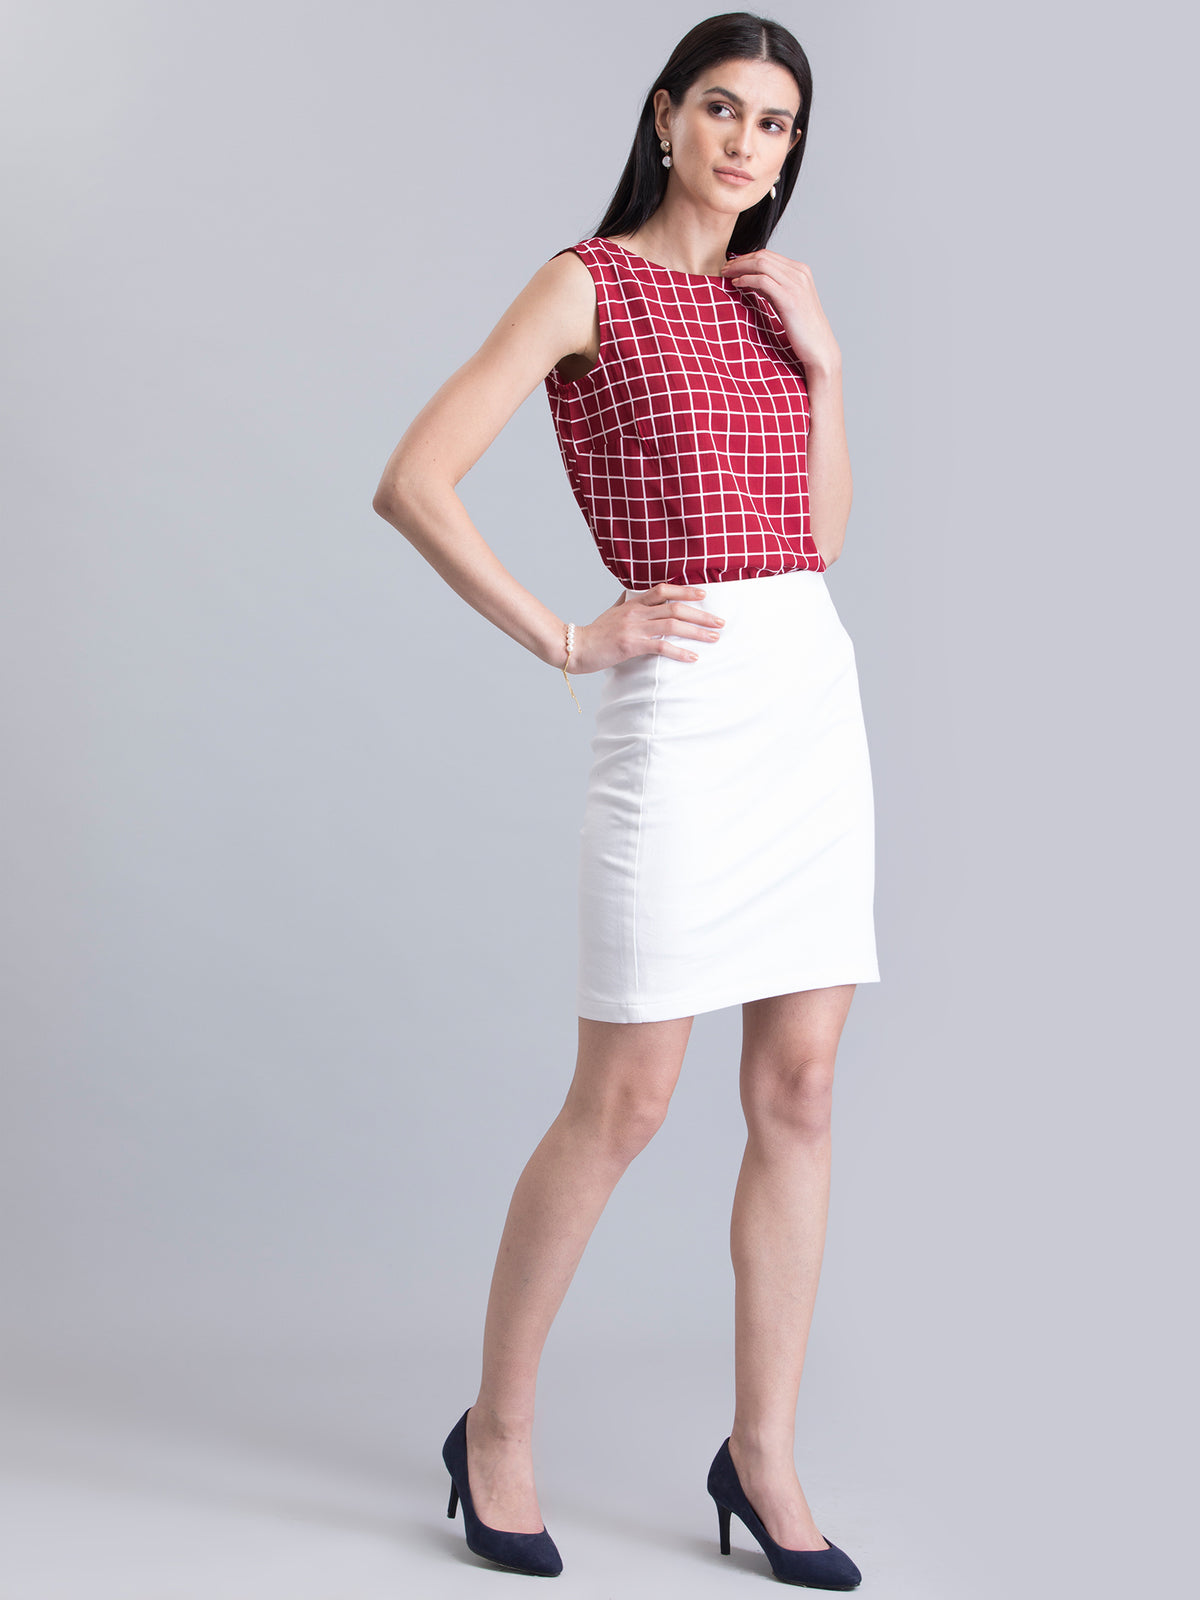 Round Neck Check Top - Red and White| Formal Tops